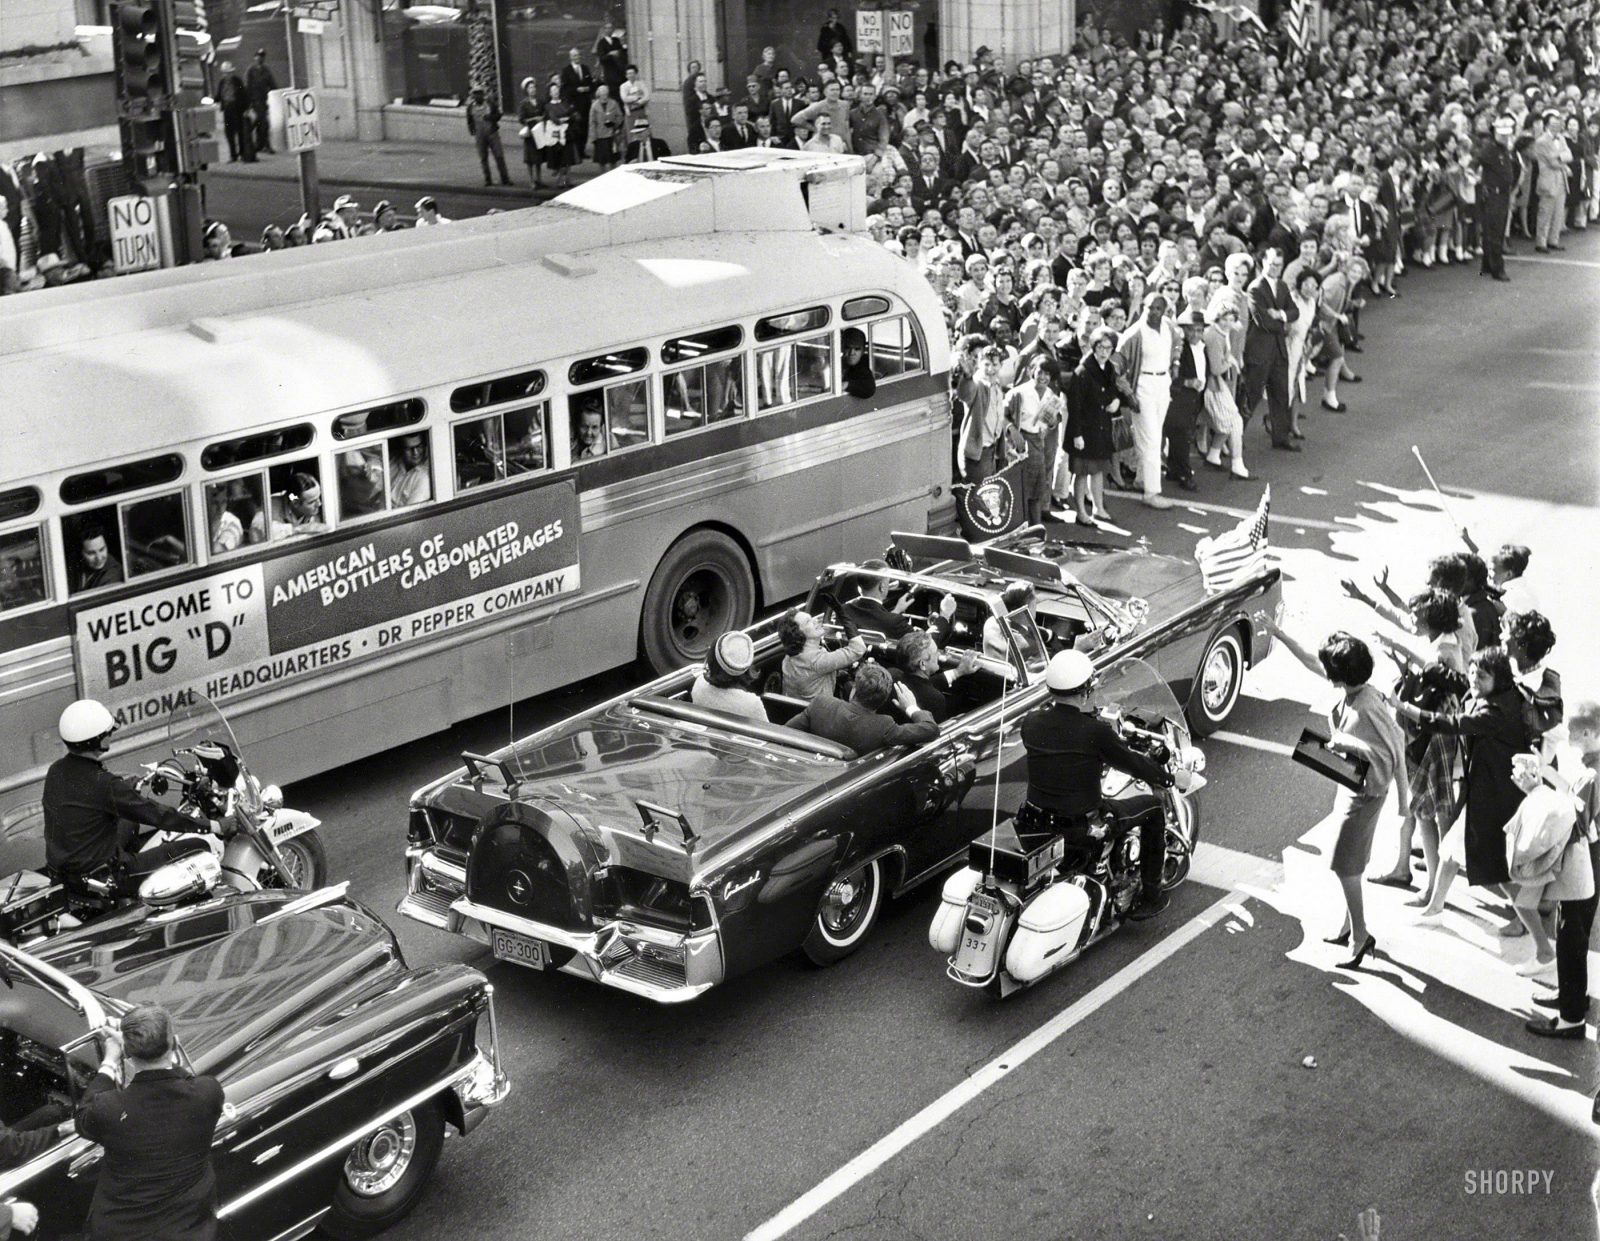 Can You Get an ‘A’ In This Middle School U.S. History Test? Motorcade